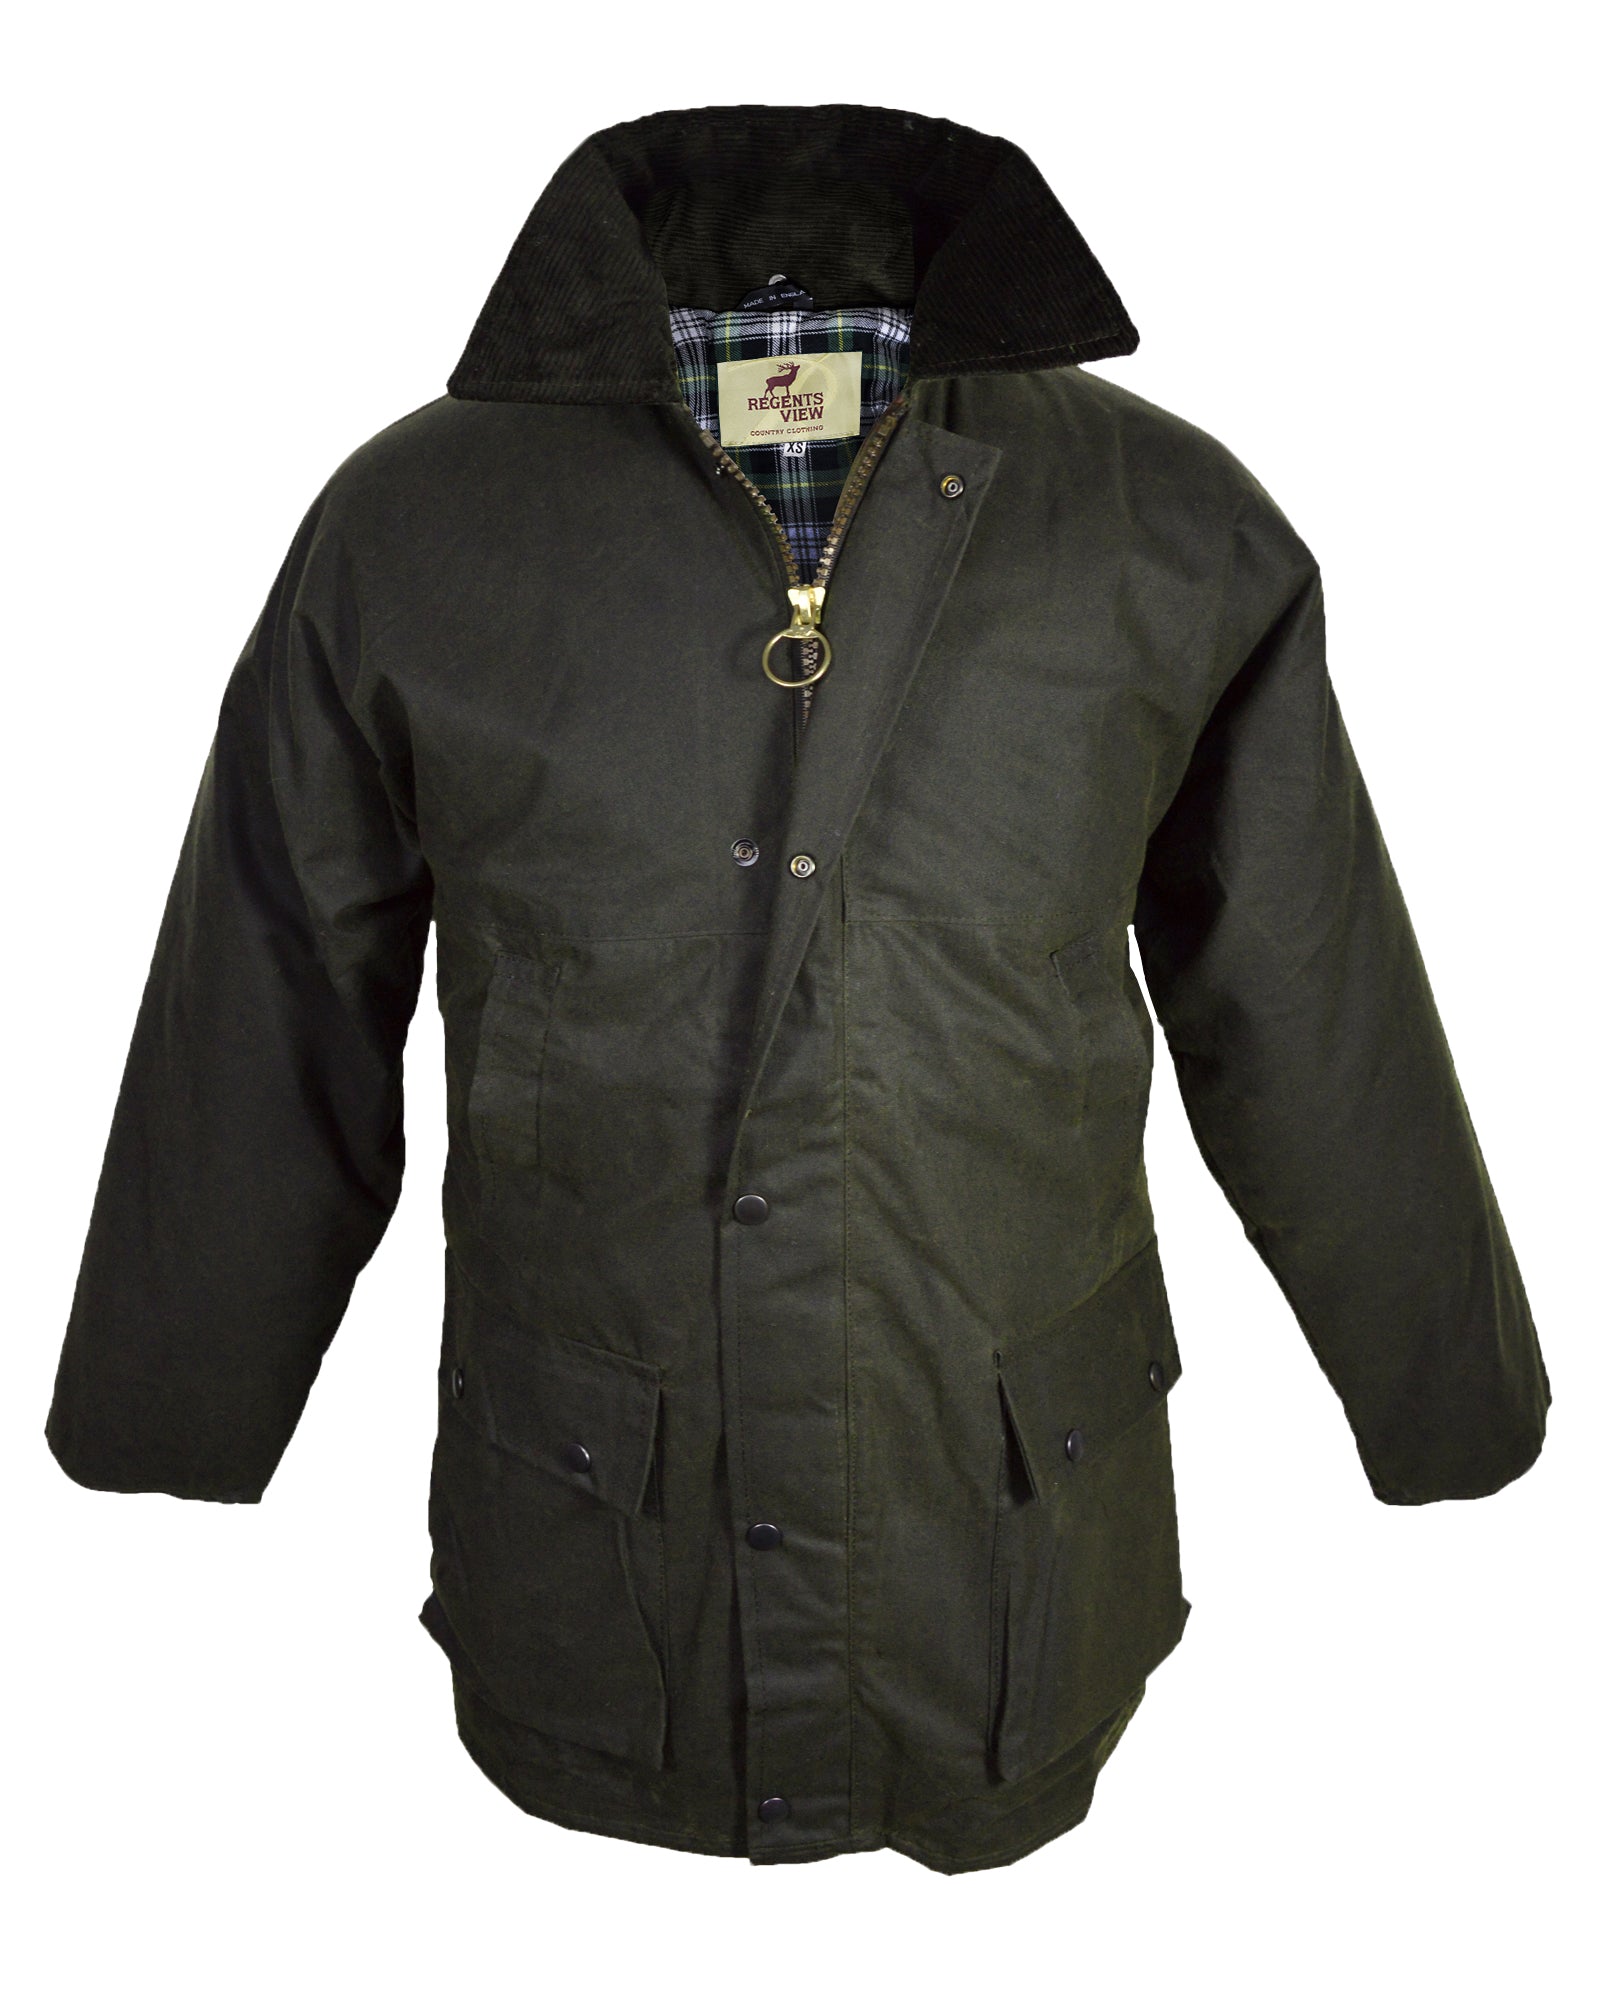 Regents View Padded Waxed Cotton Jacket 